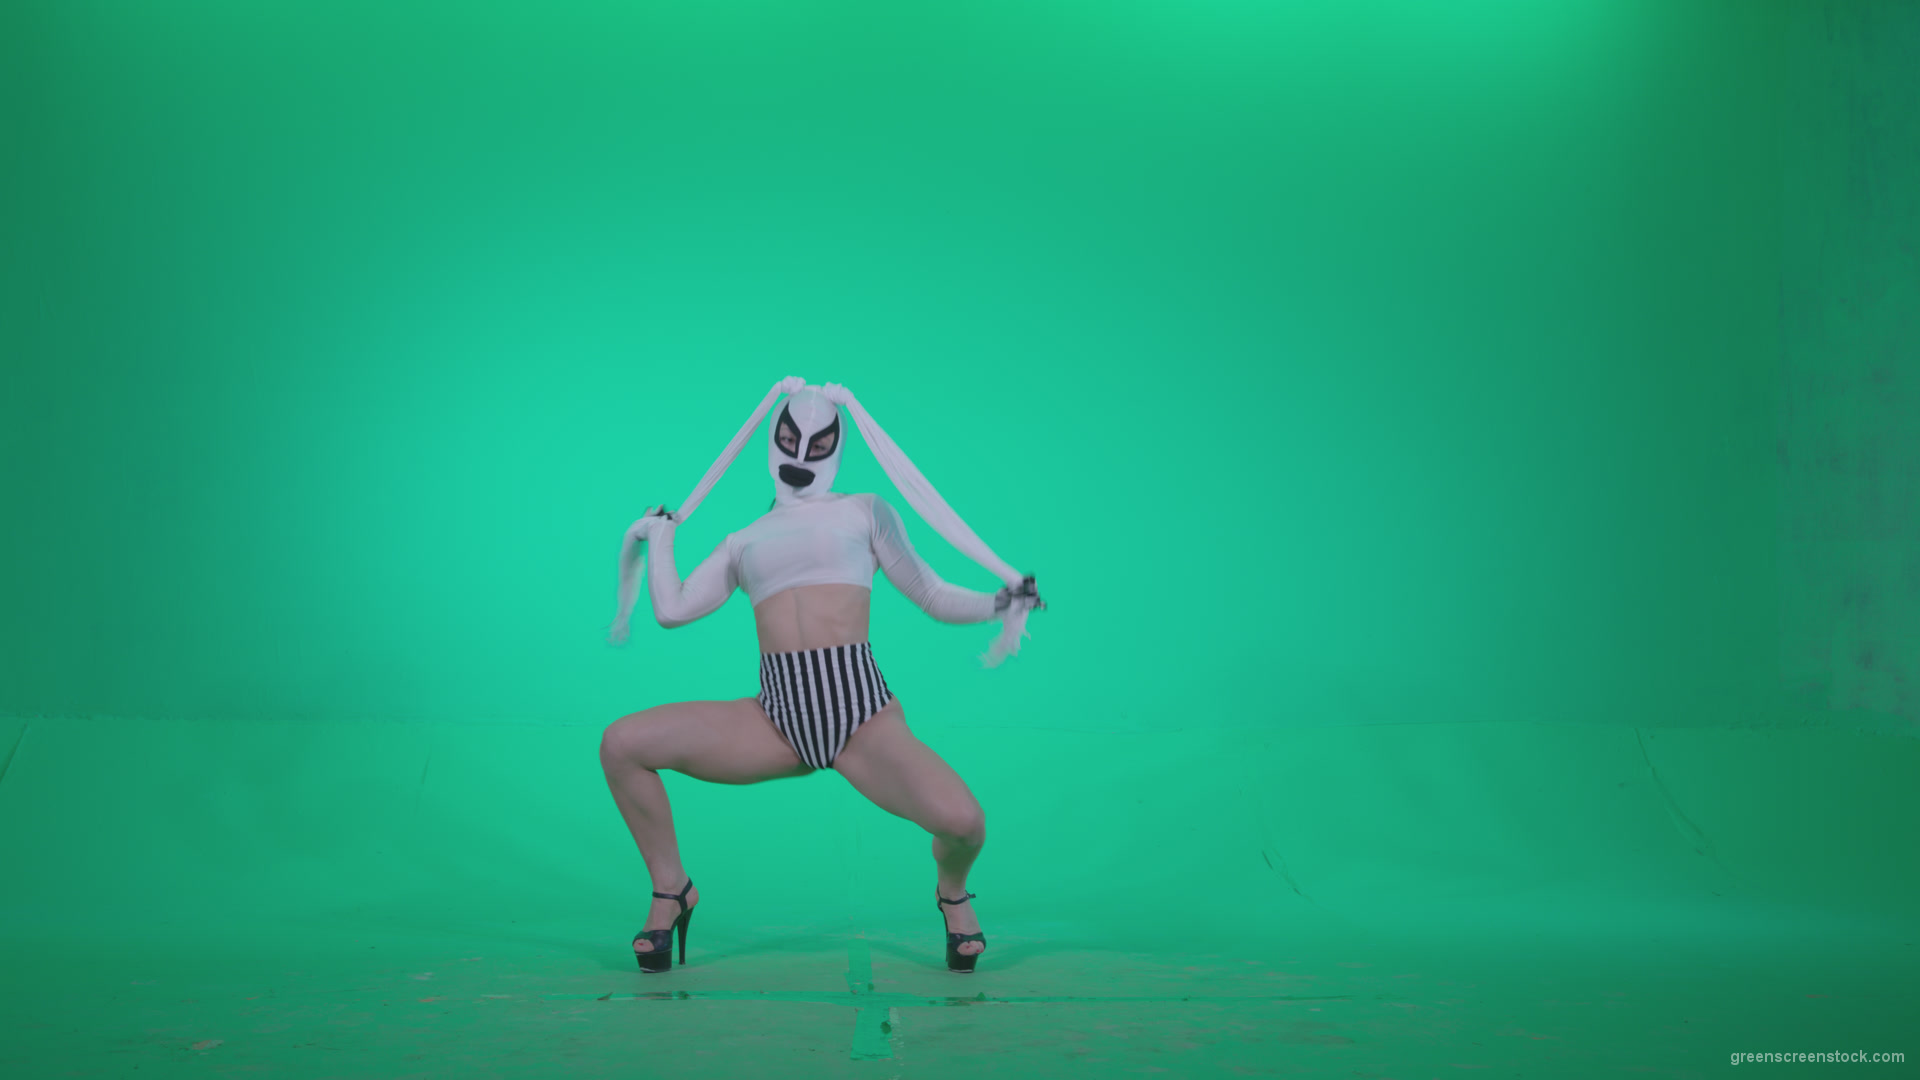 Go-go-Dancer-with-Latex-Top-t1-Green-Screen-Video-Footage_007 Green Screen Stock